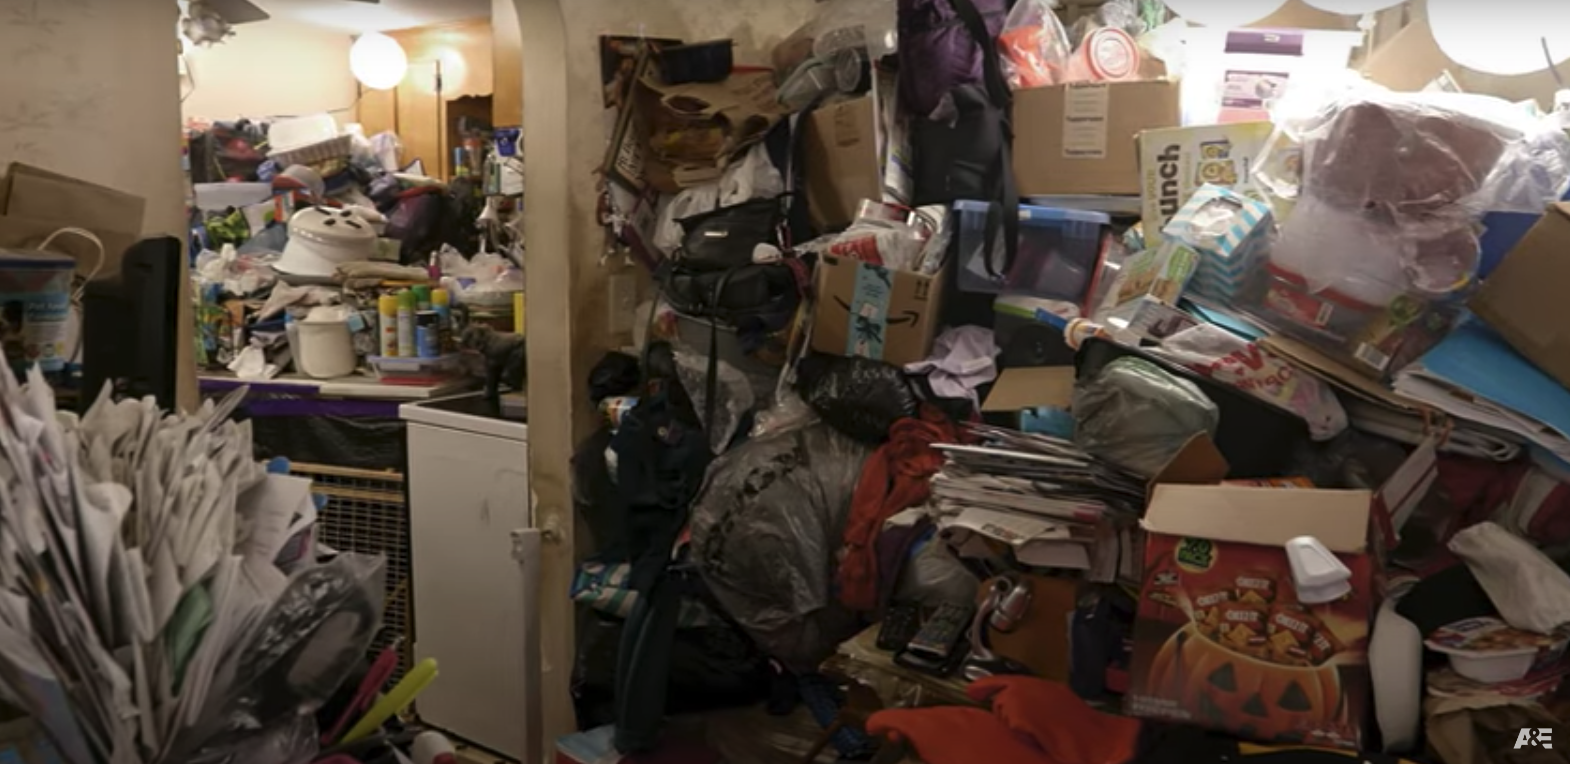 shot of a hoarder house from the A&E series 'Hoarders'